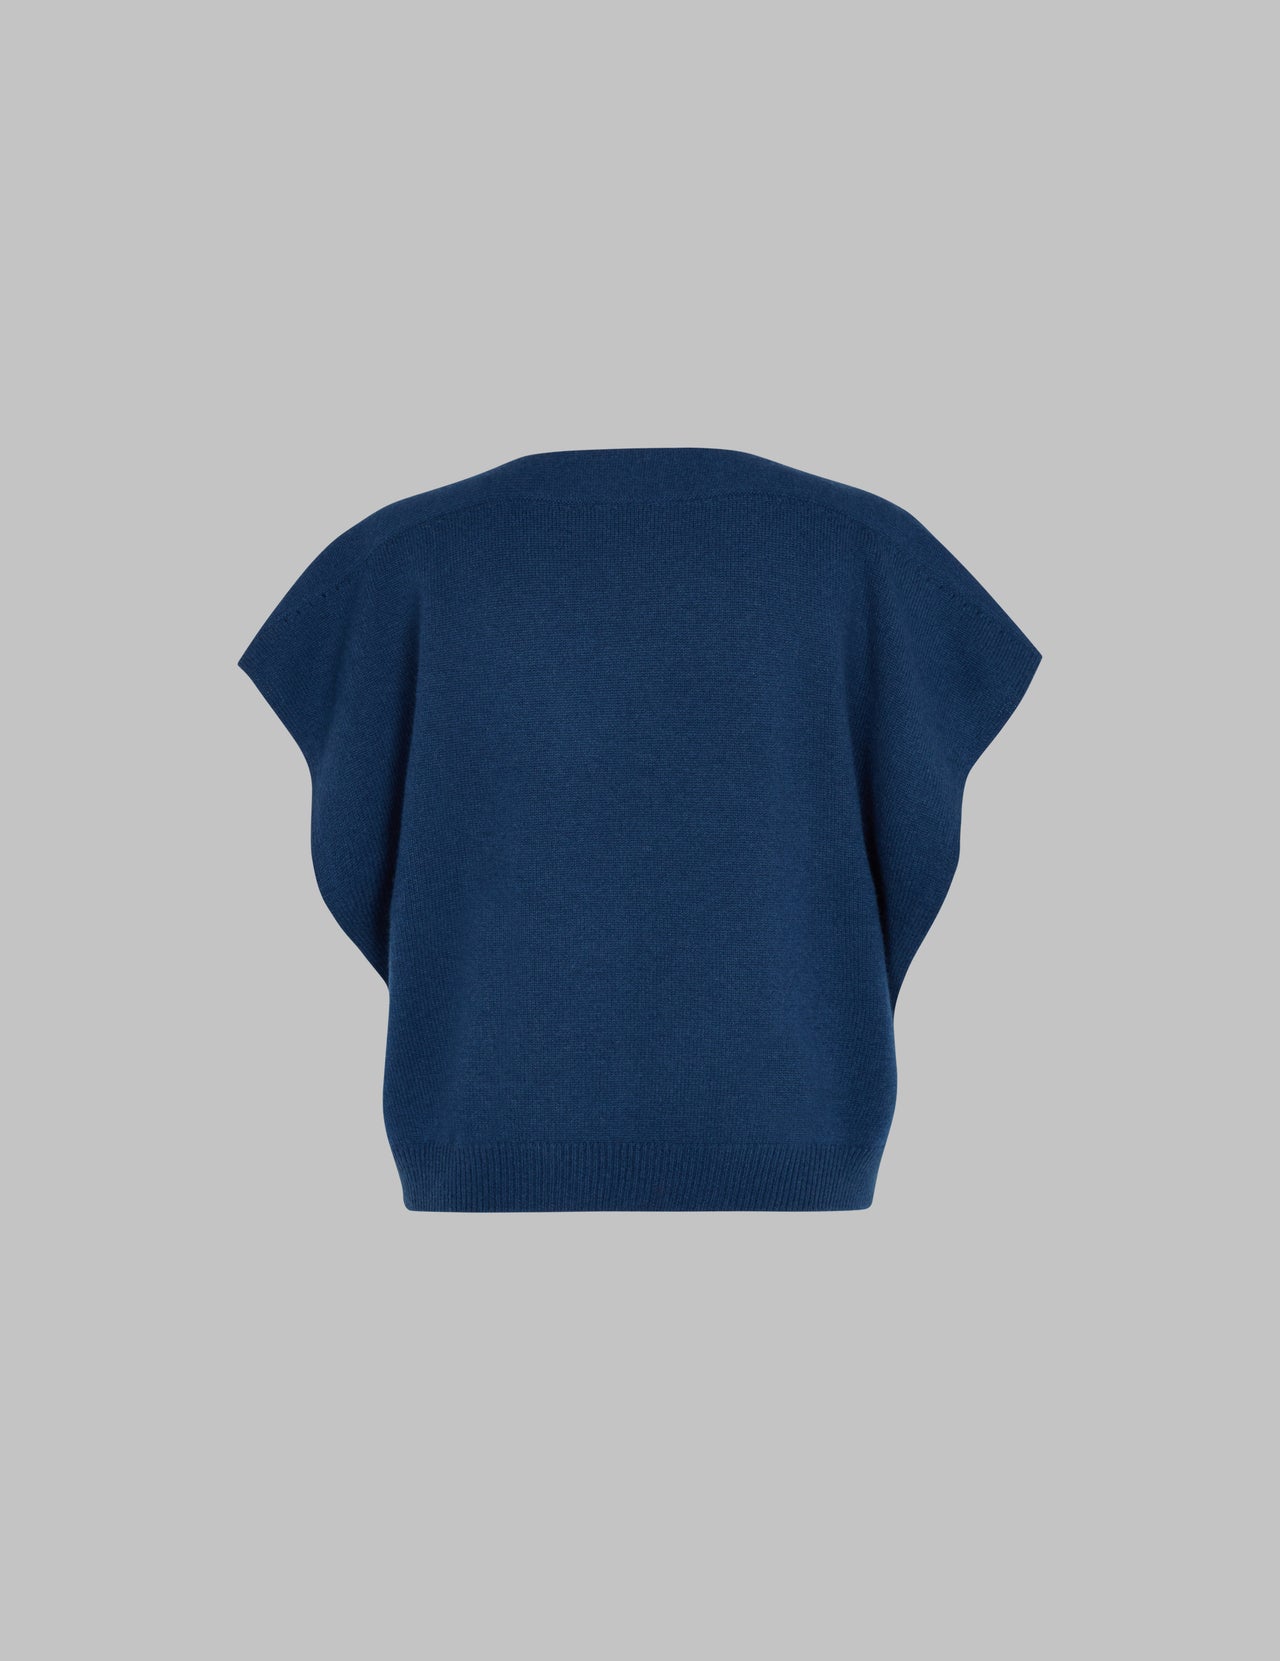  Prussian Blue Cashmere Boat Neck Top  